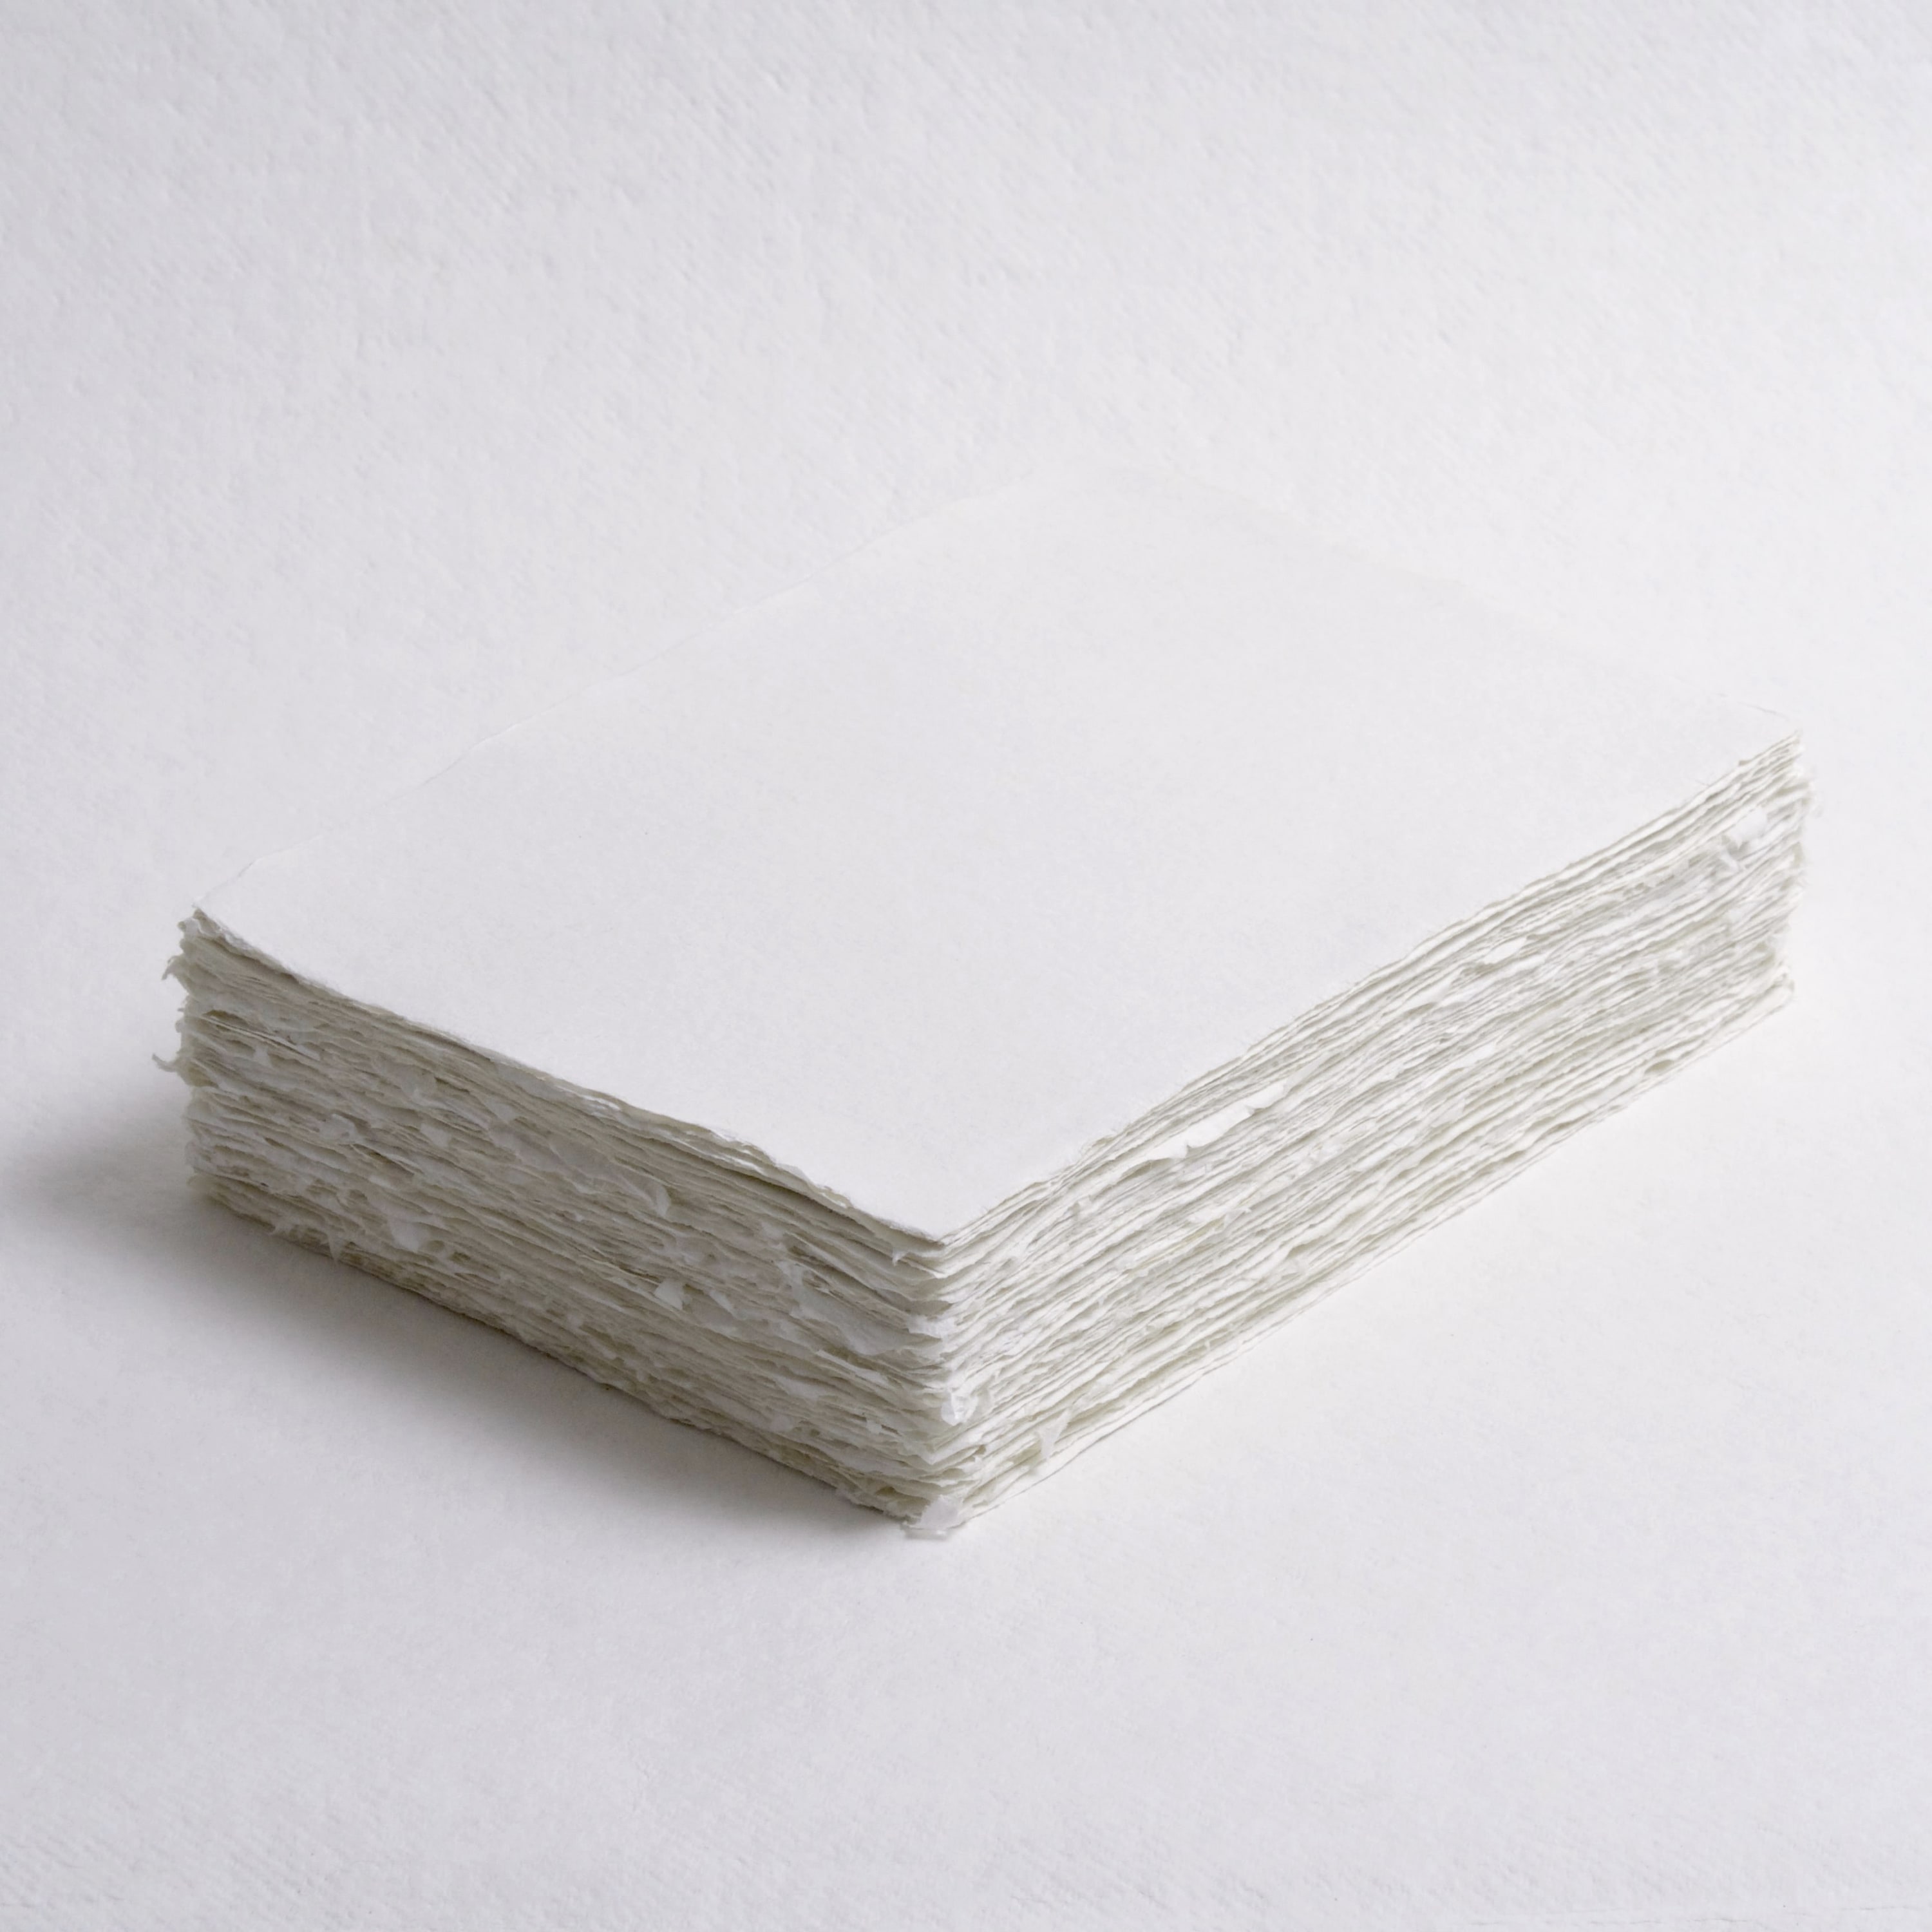 Handmade paper sheets deckled edge thick acid free natural paper